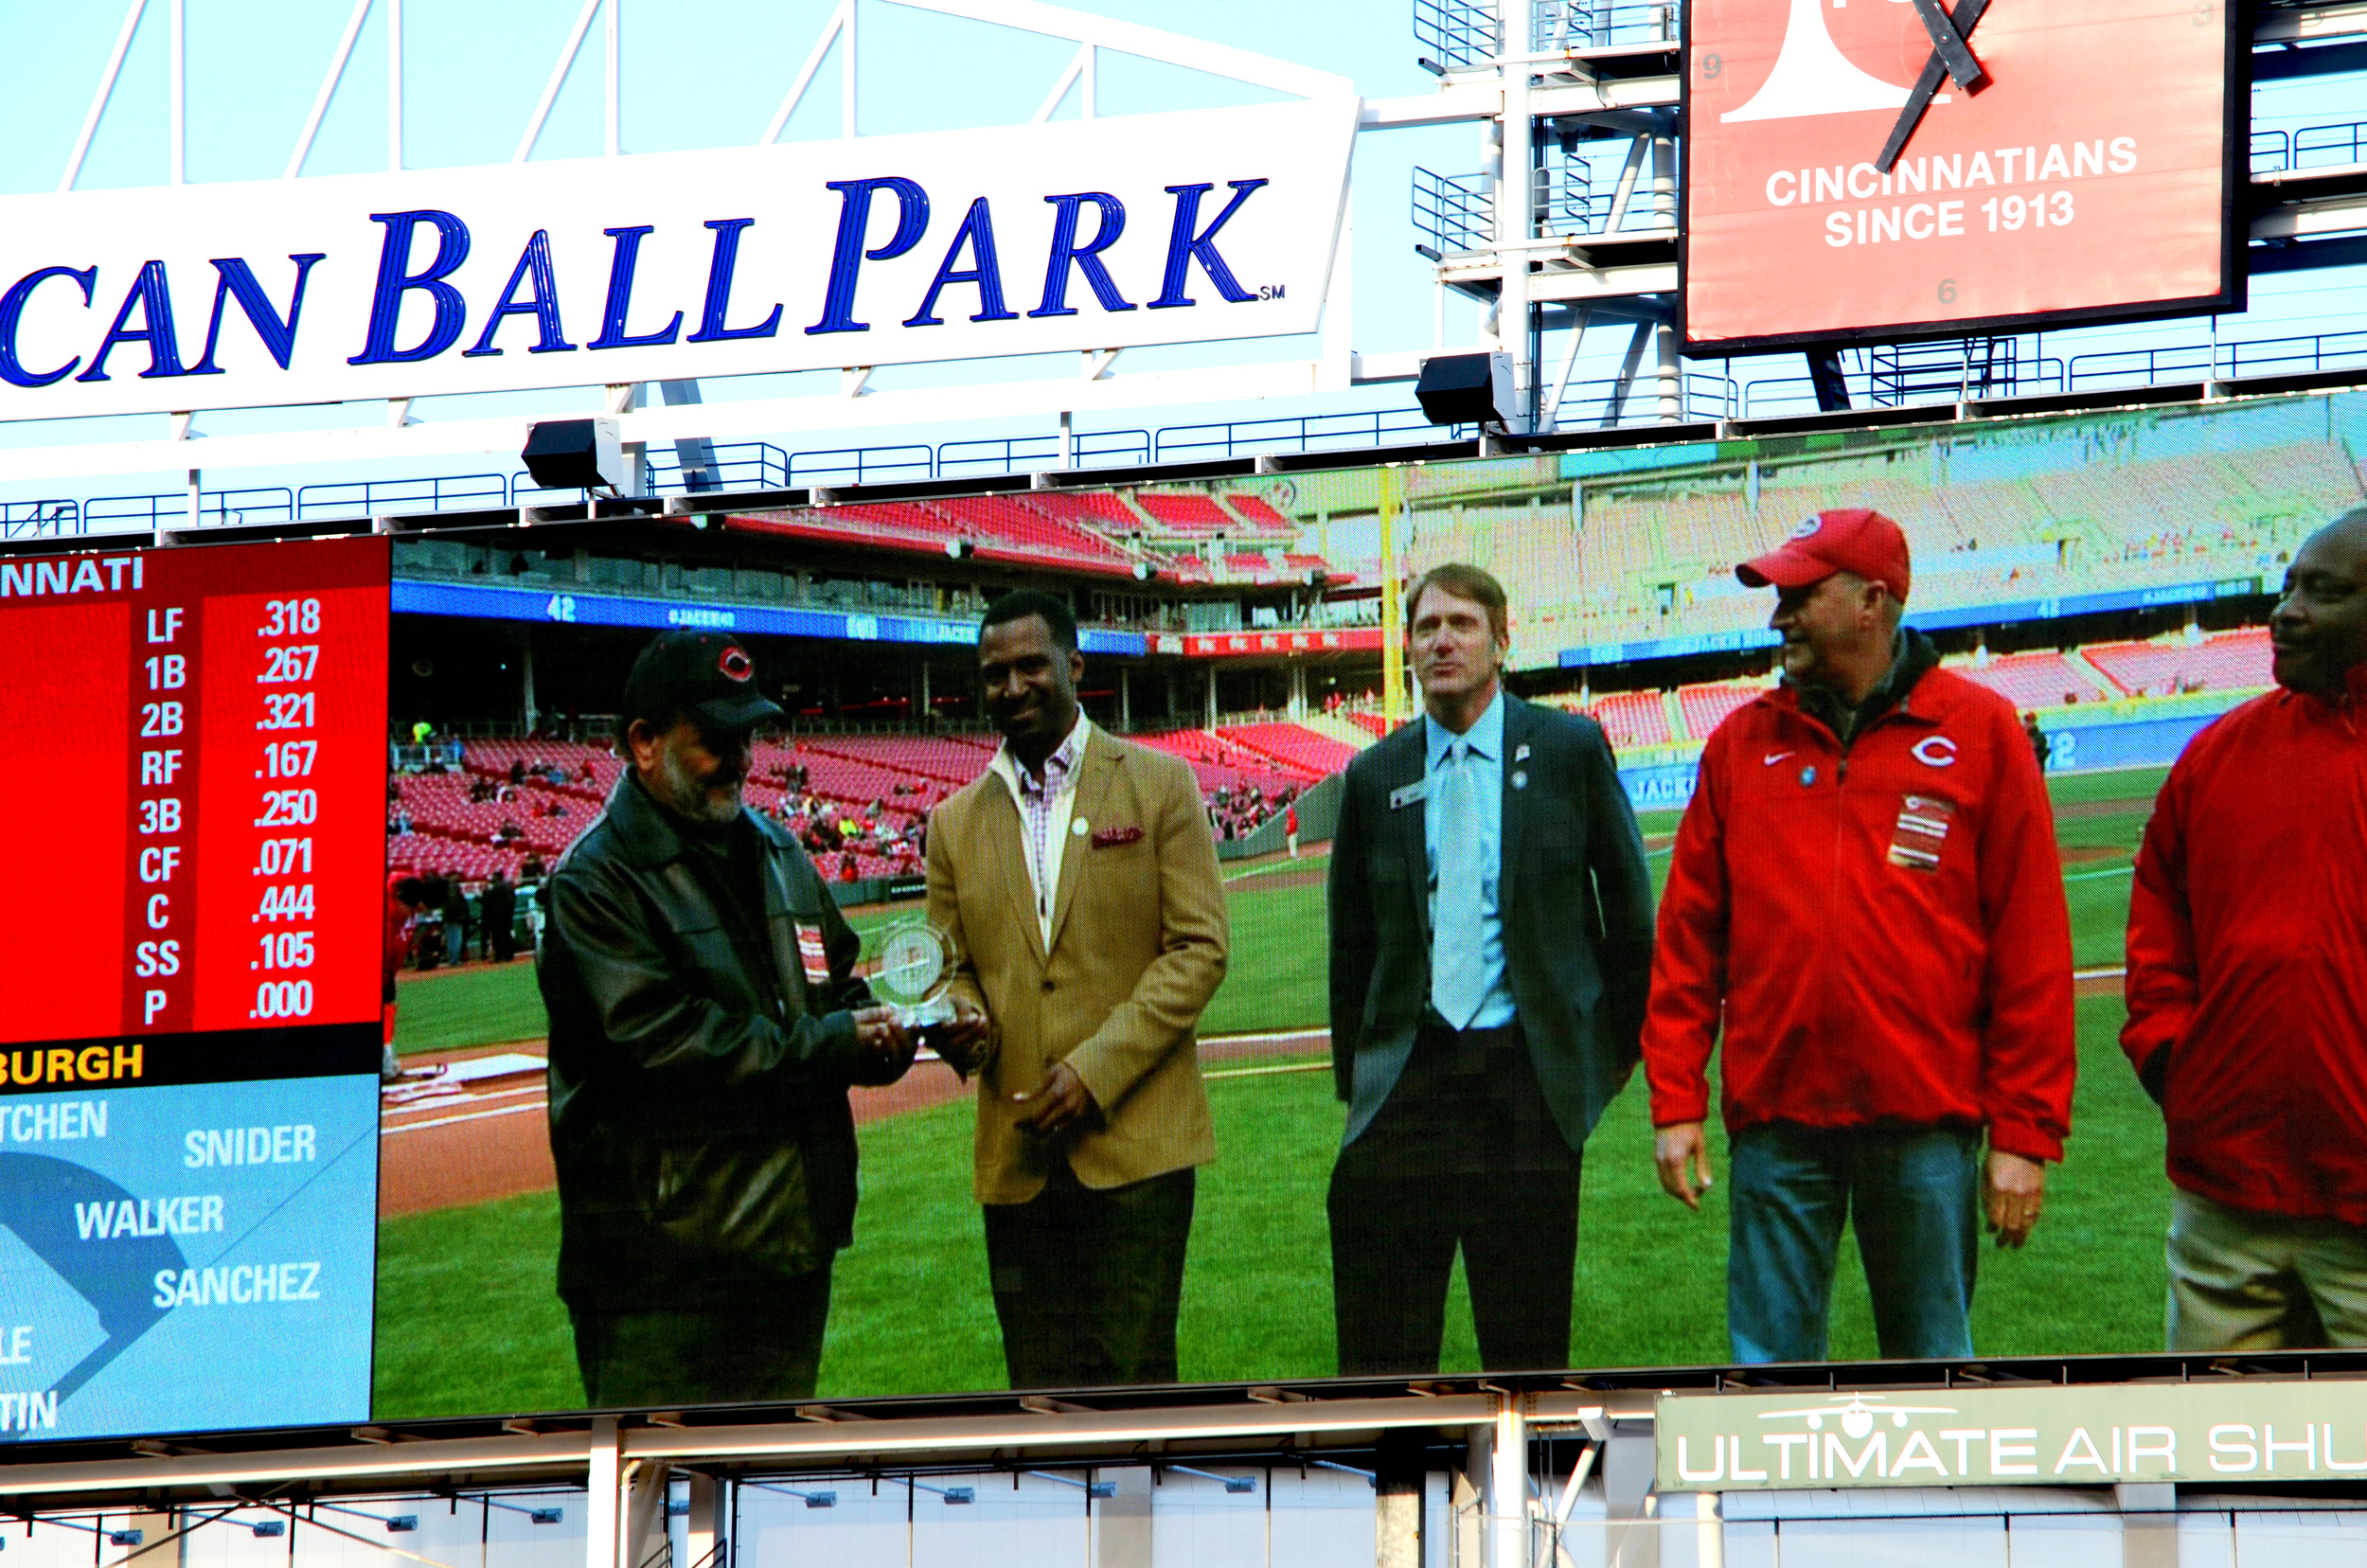  Clay Holland ( Owner and President), Sean Rugless (President of African American Chamber of Commerce), Charlie Frank (Cincinnati REDS), Chris Bain (Kokosing Construction Co.) Joe Morgan (MLB Hall of Famer and Former Cincinnati Reds Player). 